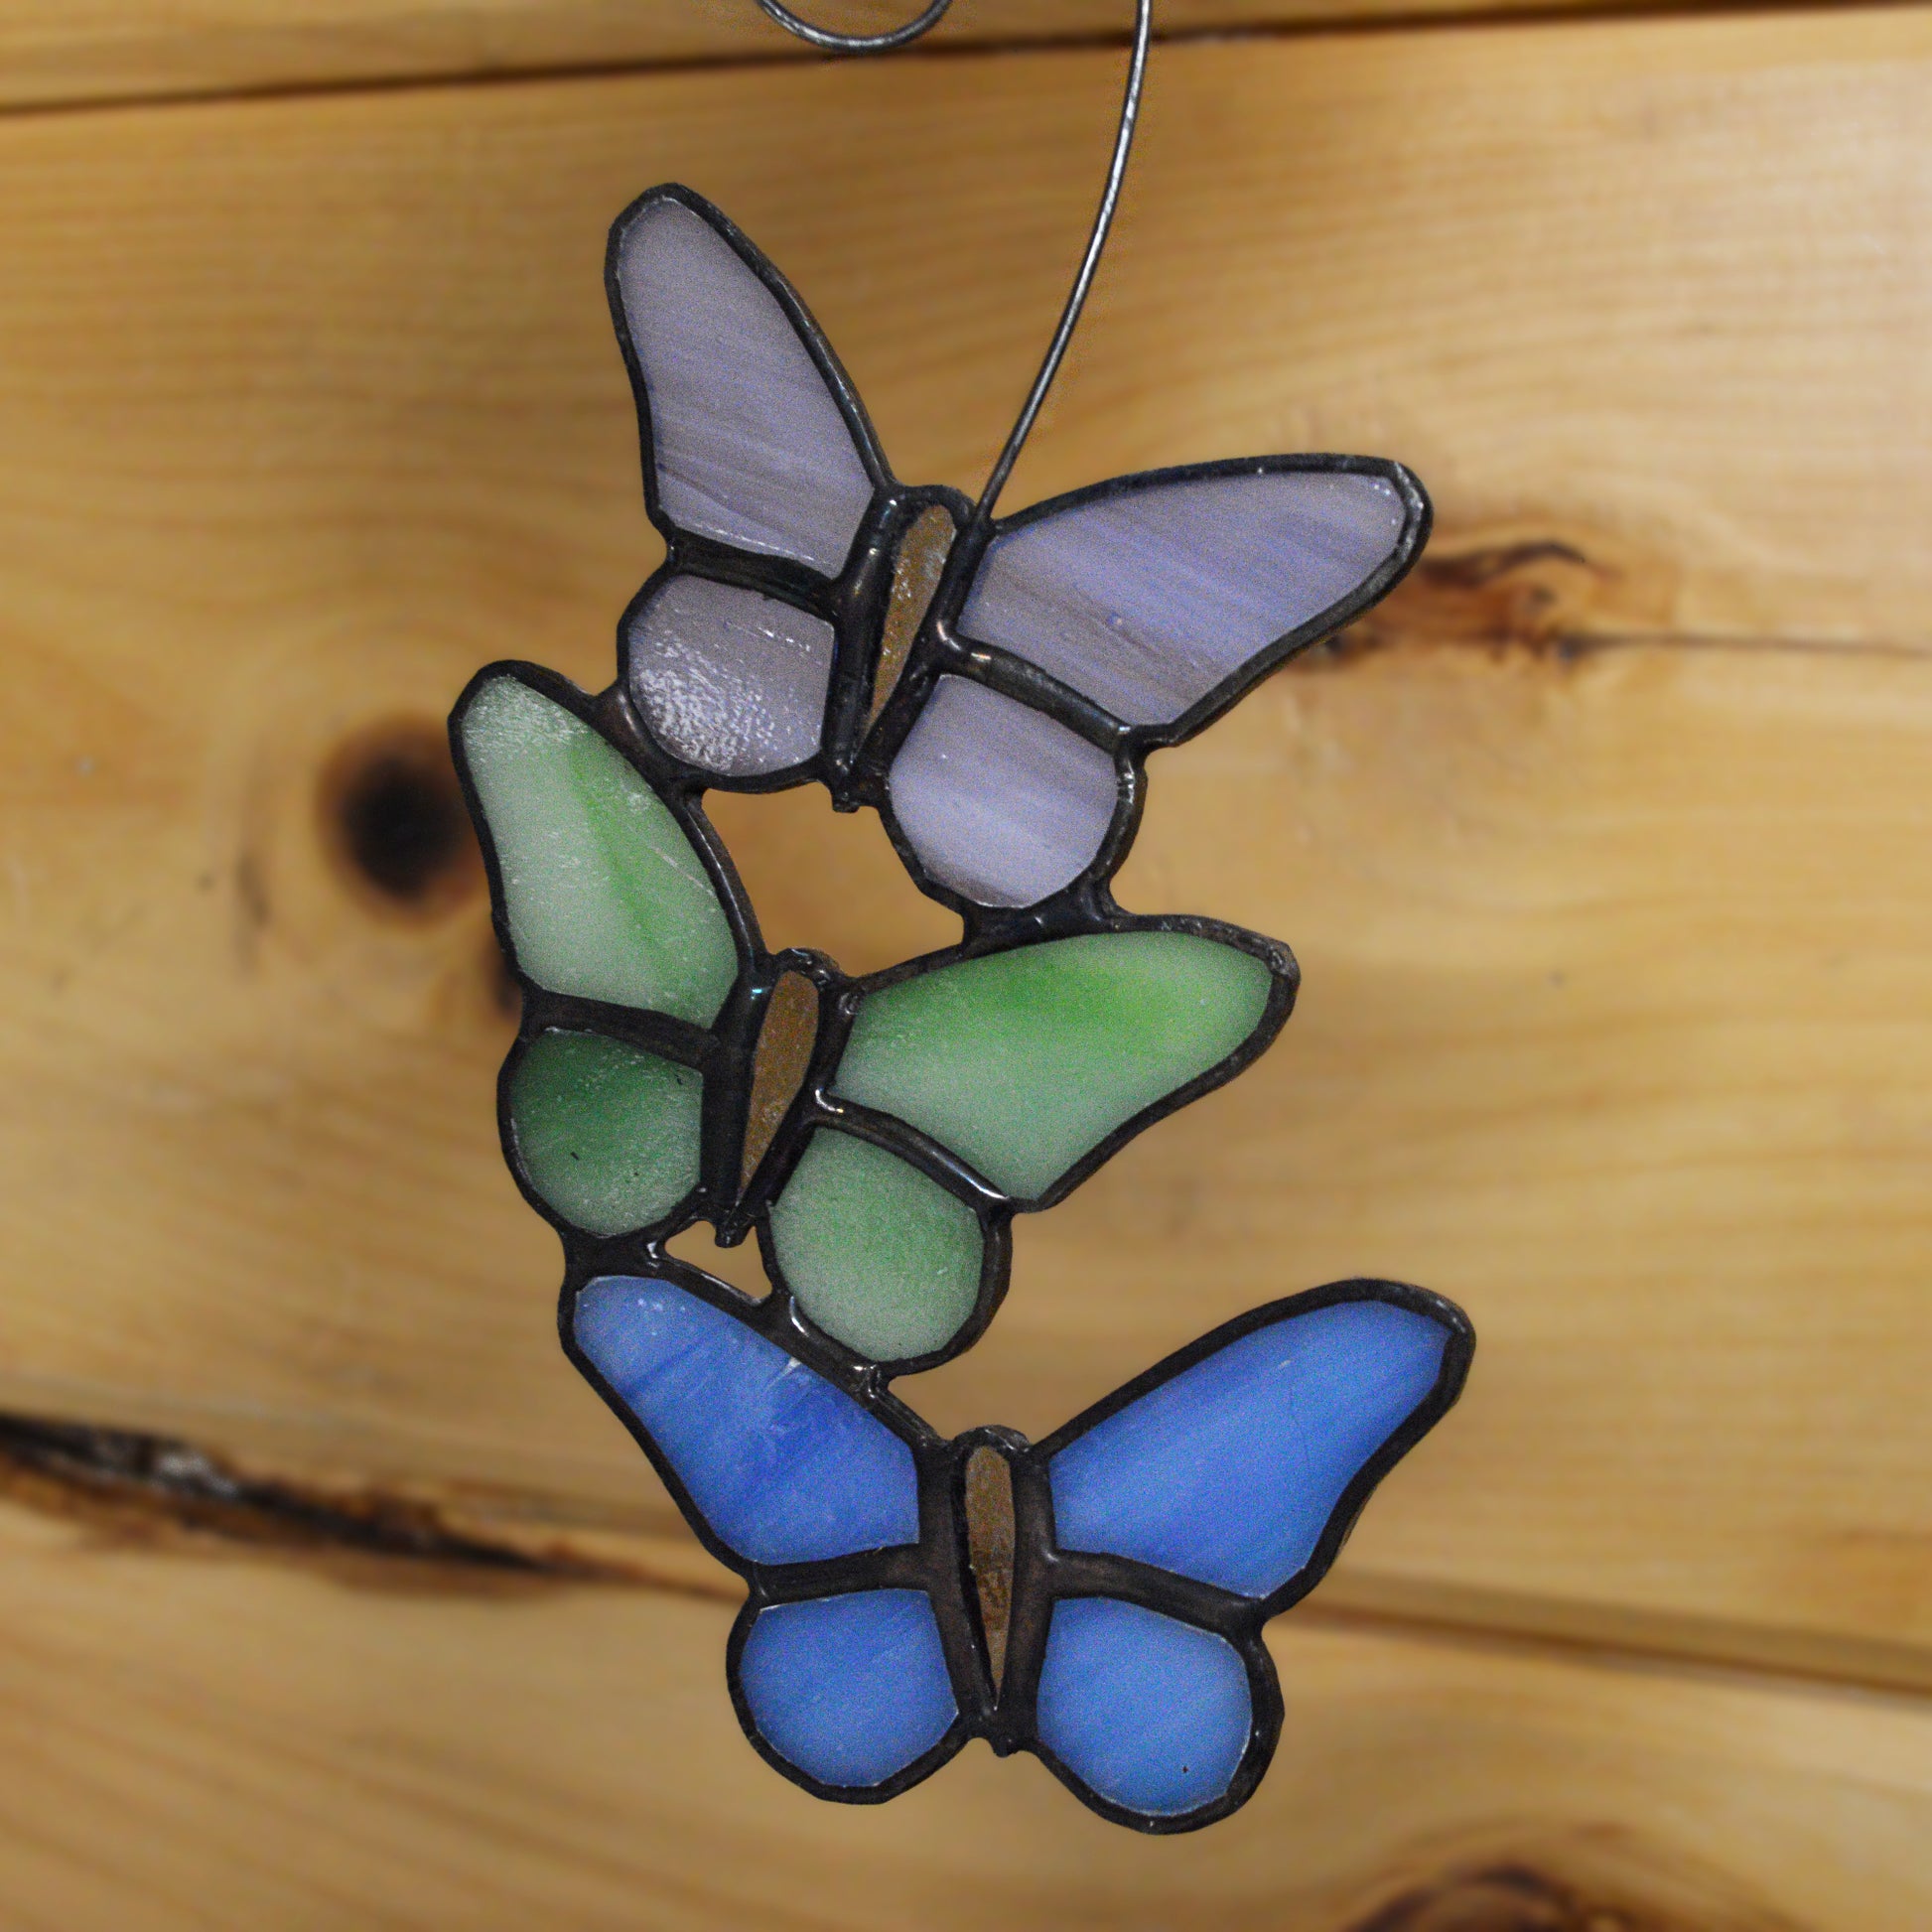 This beautiful butterfly suncatcher hangs perfectly in any window, and will brighten up your living space! It would also make a great gift great addition to any floral arrangement!    All stained glass is handmade by Deb's Broken glass in Bathurst NB.   